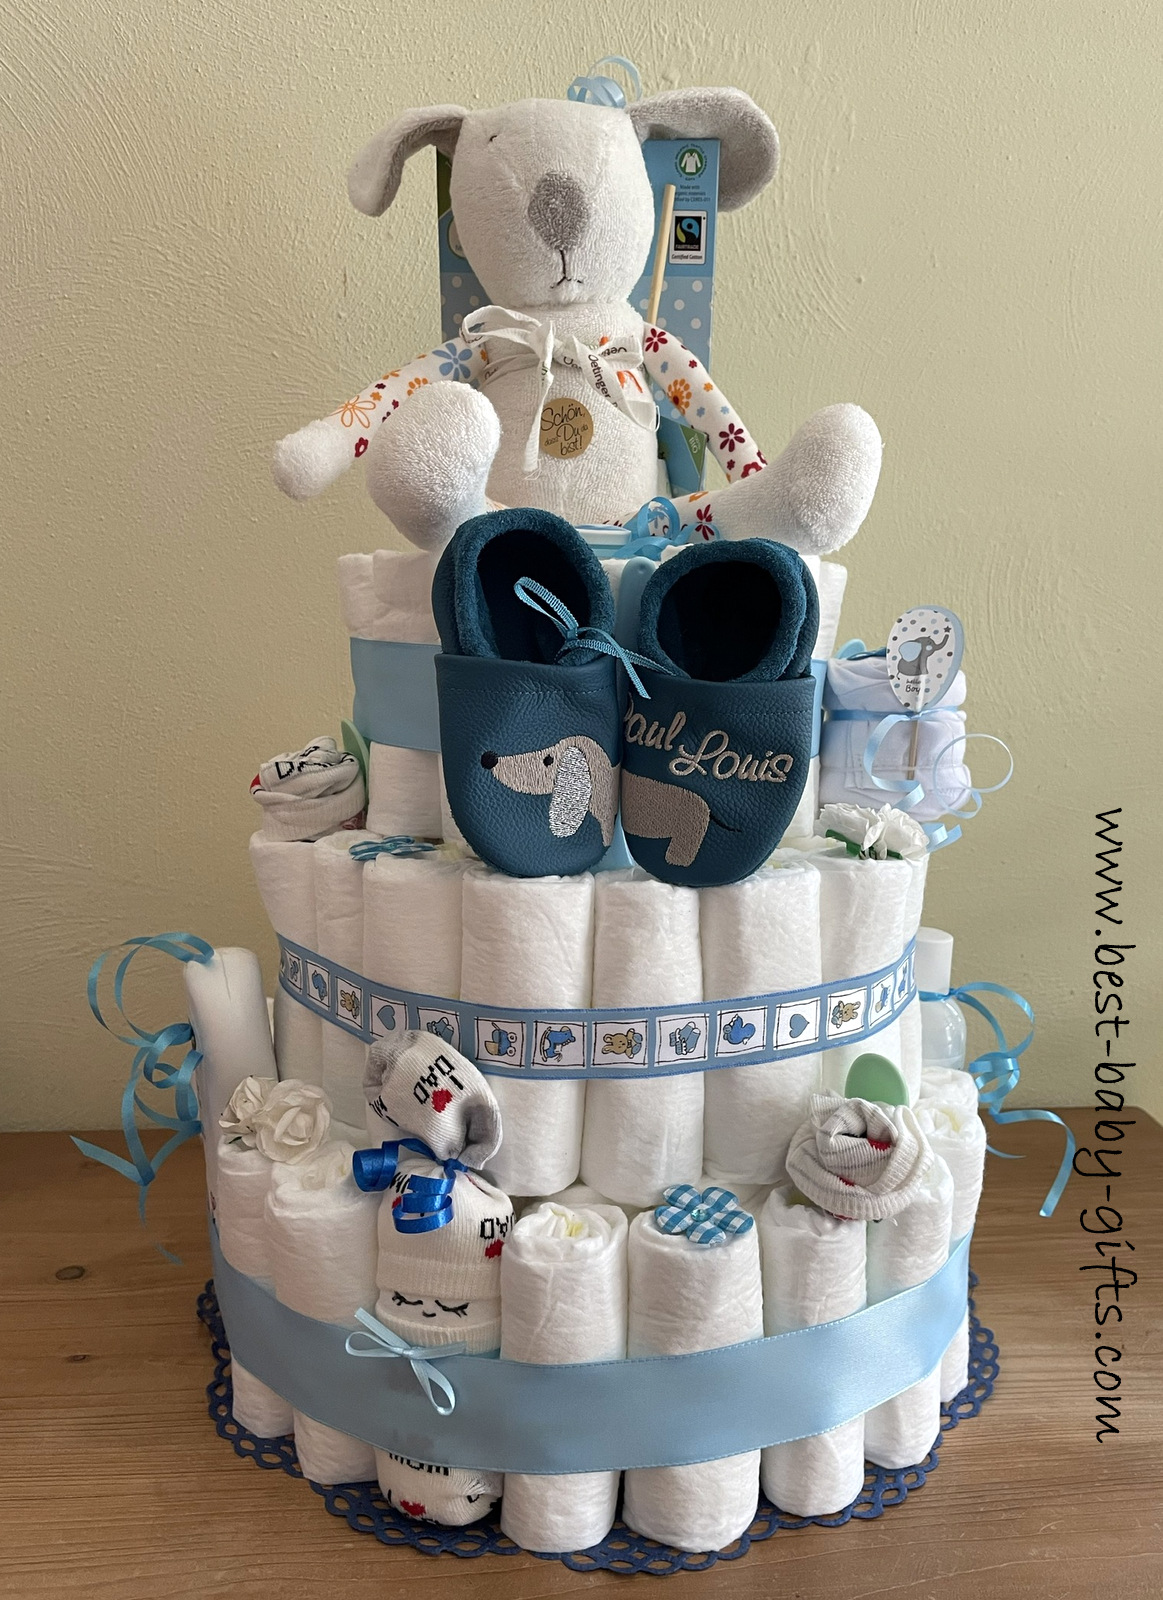 82 Diaper Cake Ideas That Are Easy to Make - DIY Crafts